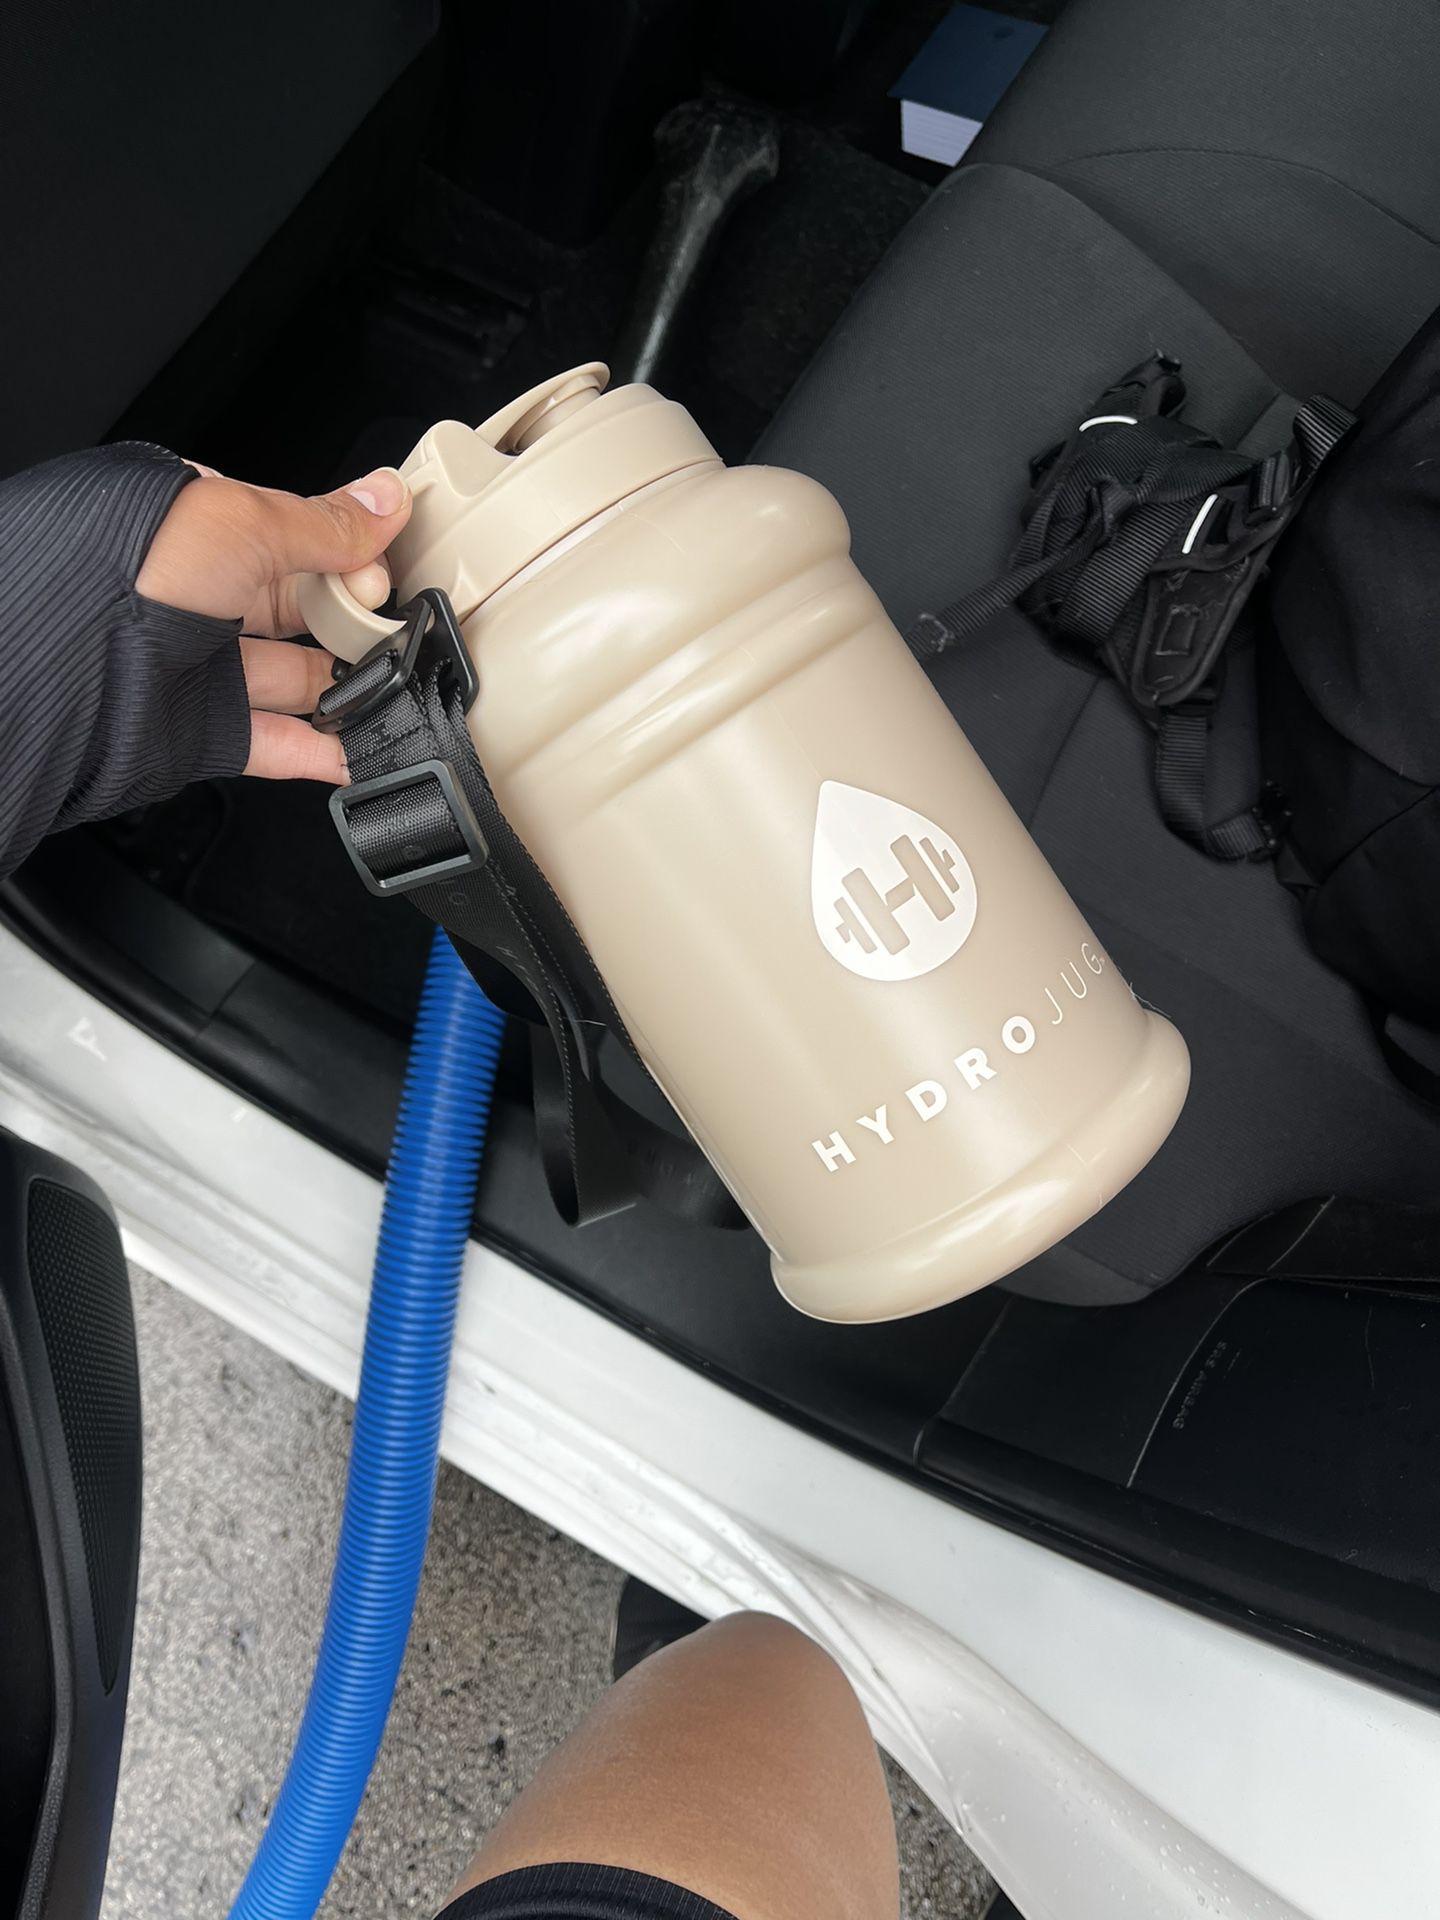 Hydro jug Gallon Water Bottle With Strap 